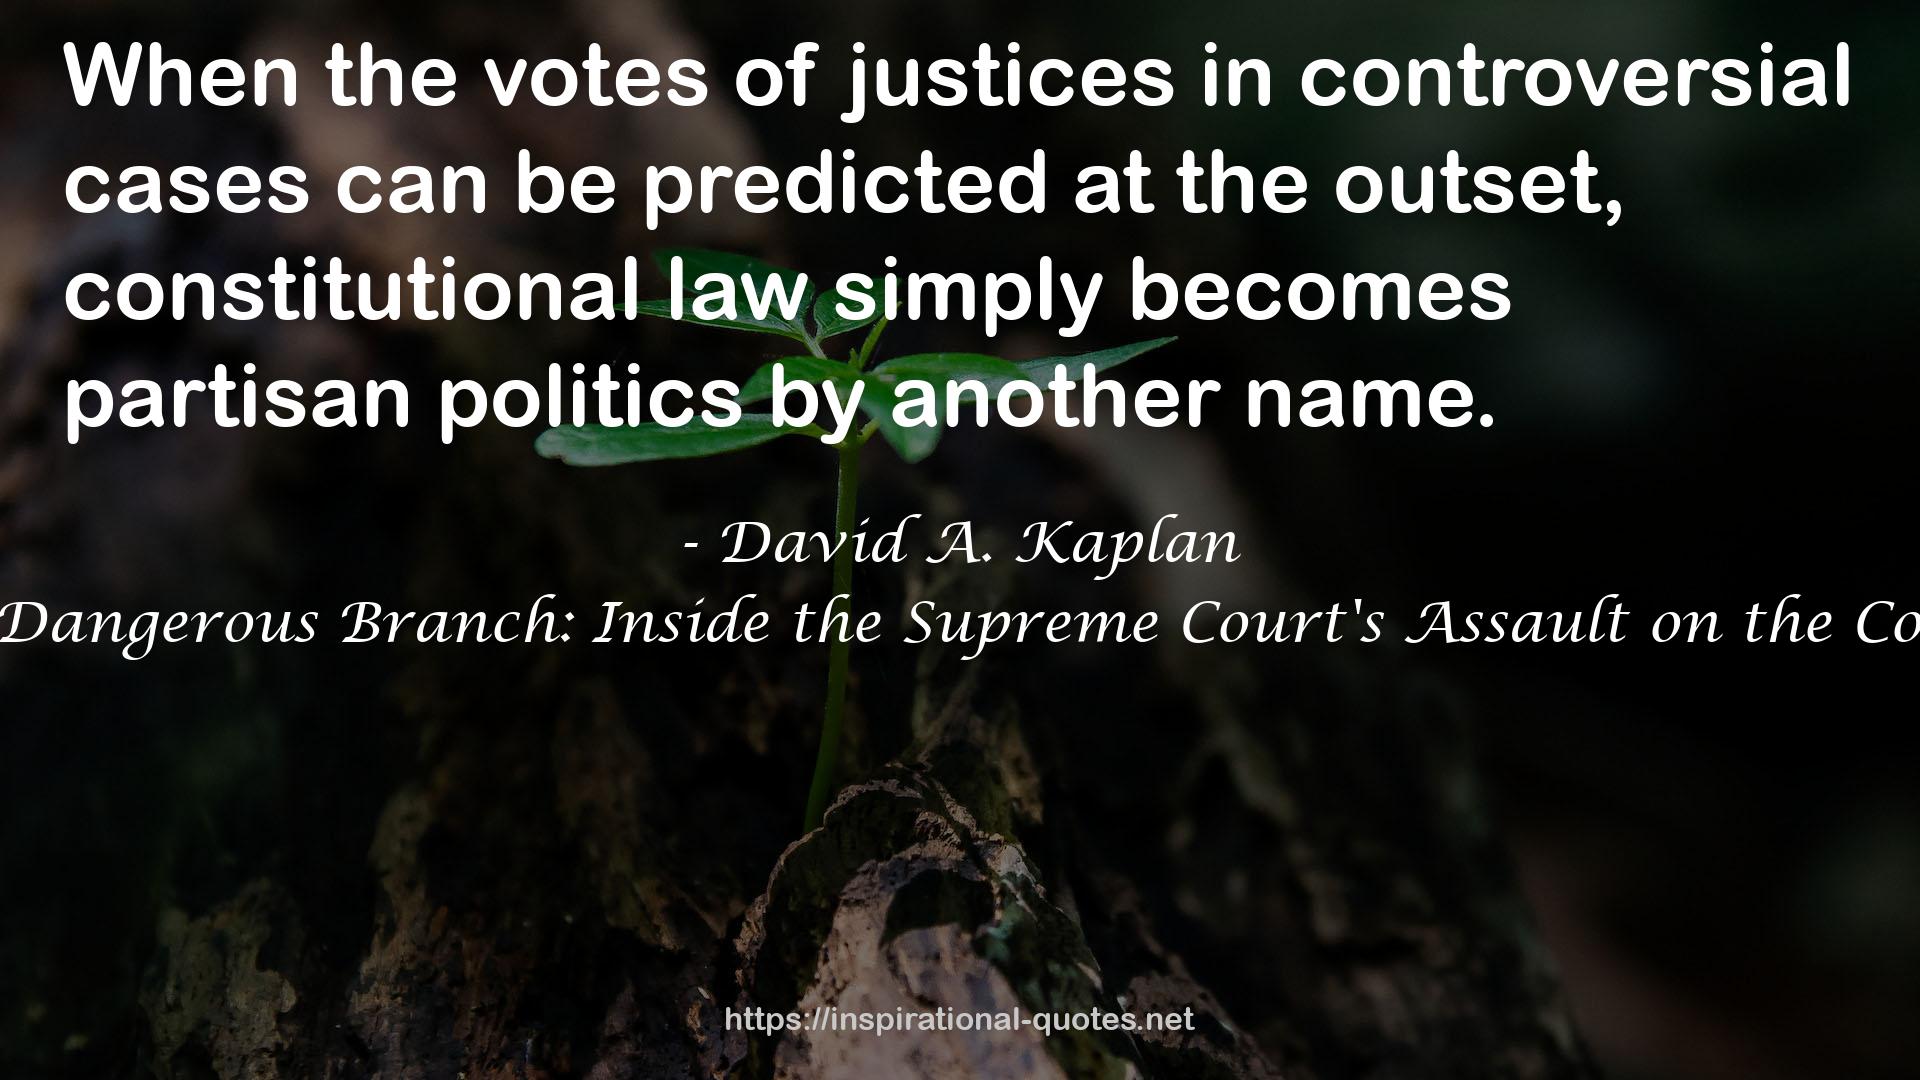 The Most Dangerous Branch: Inside the Supreme Court's Assault on the Constitution QUOTES